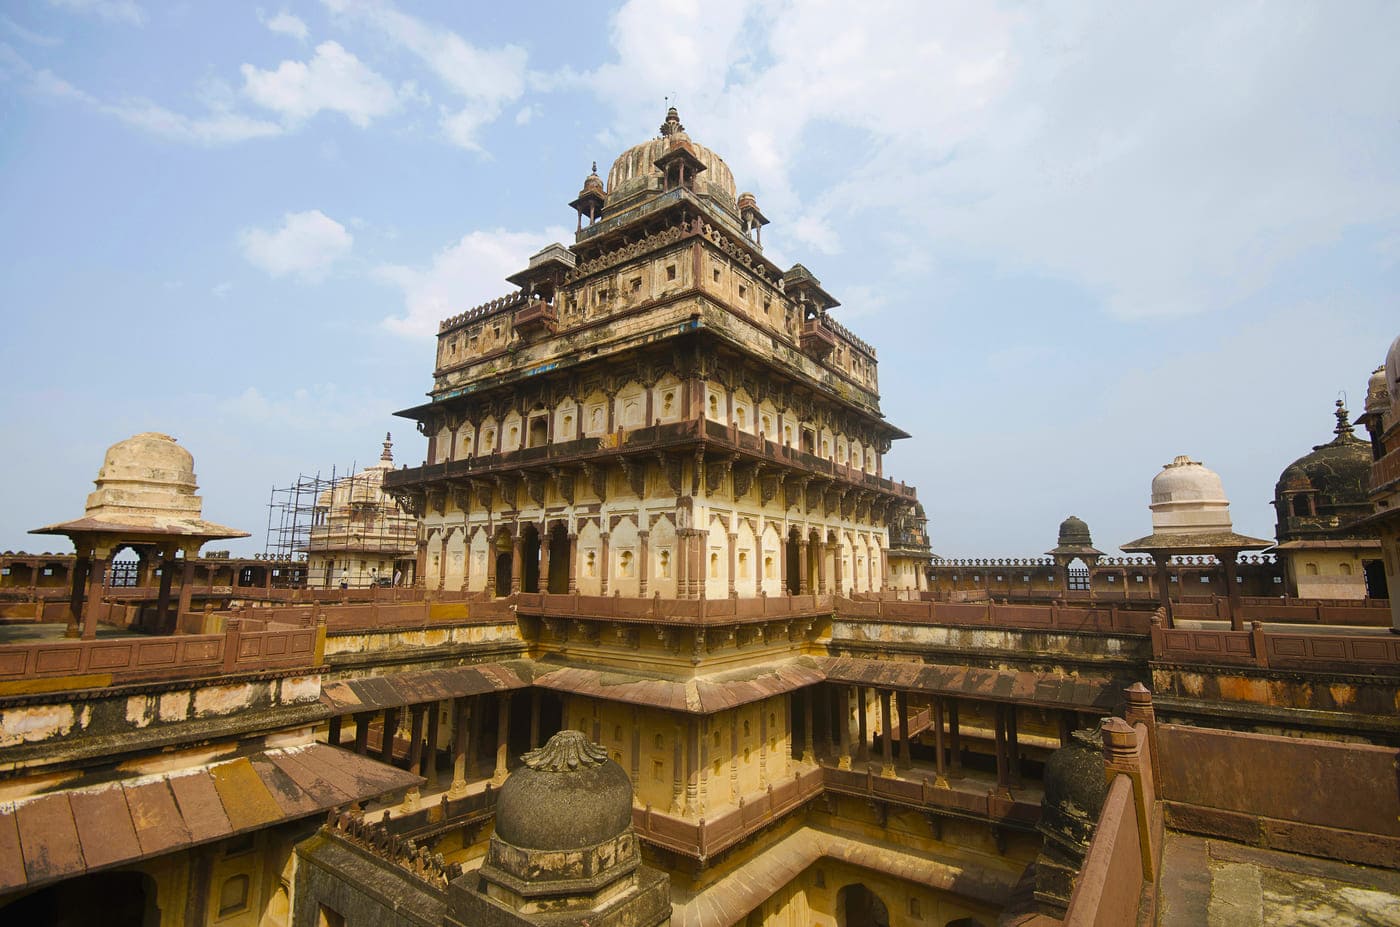 An elevated shot of the upper half of the Datia Palace that shows its extensive structure complete with complex designs and carved structures on the roof, Madhya Pradesh 